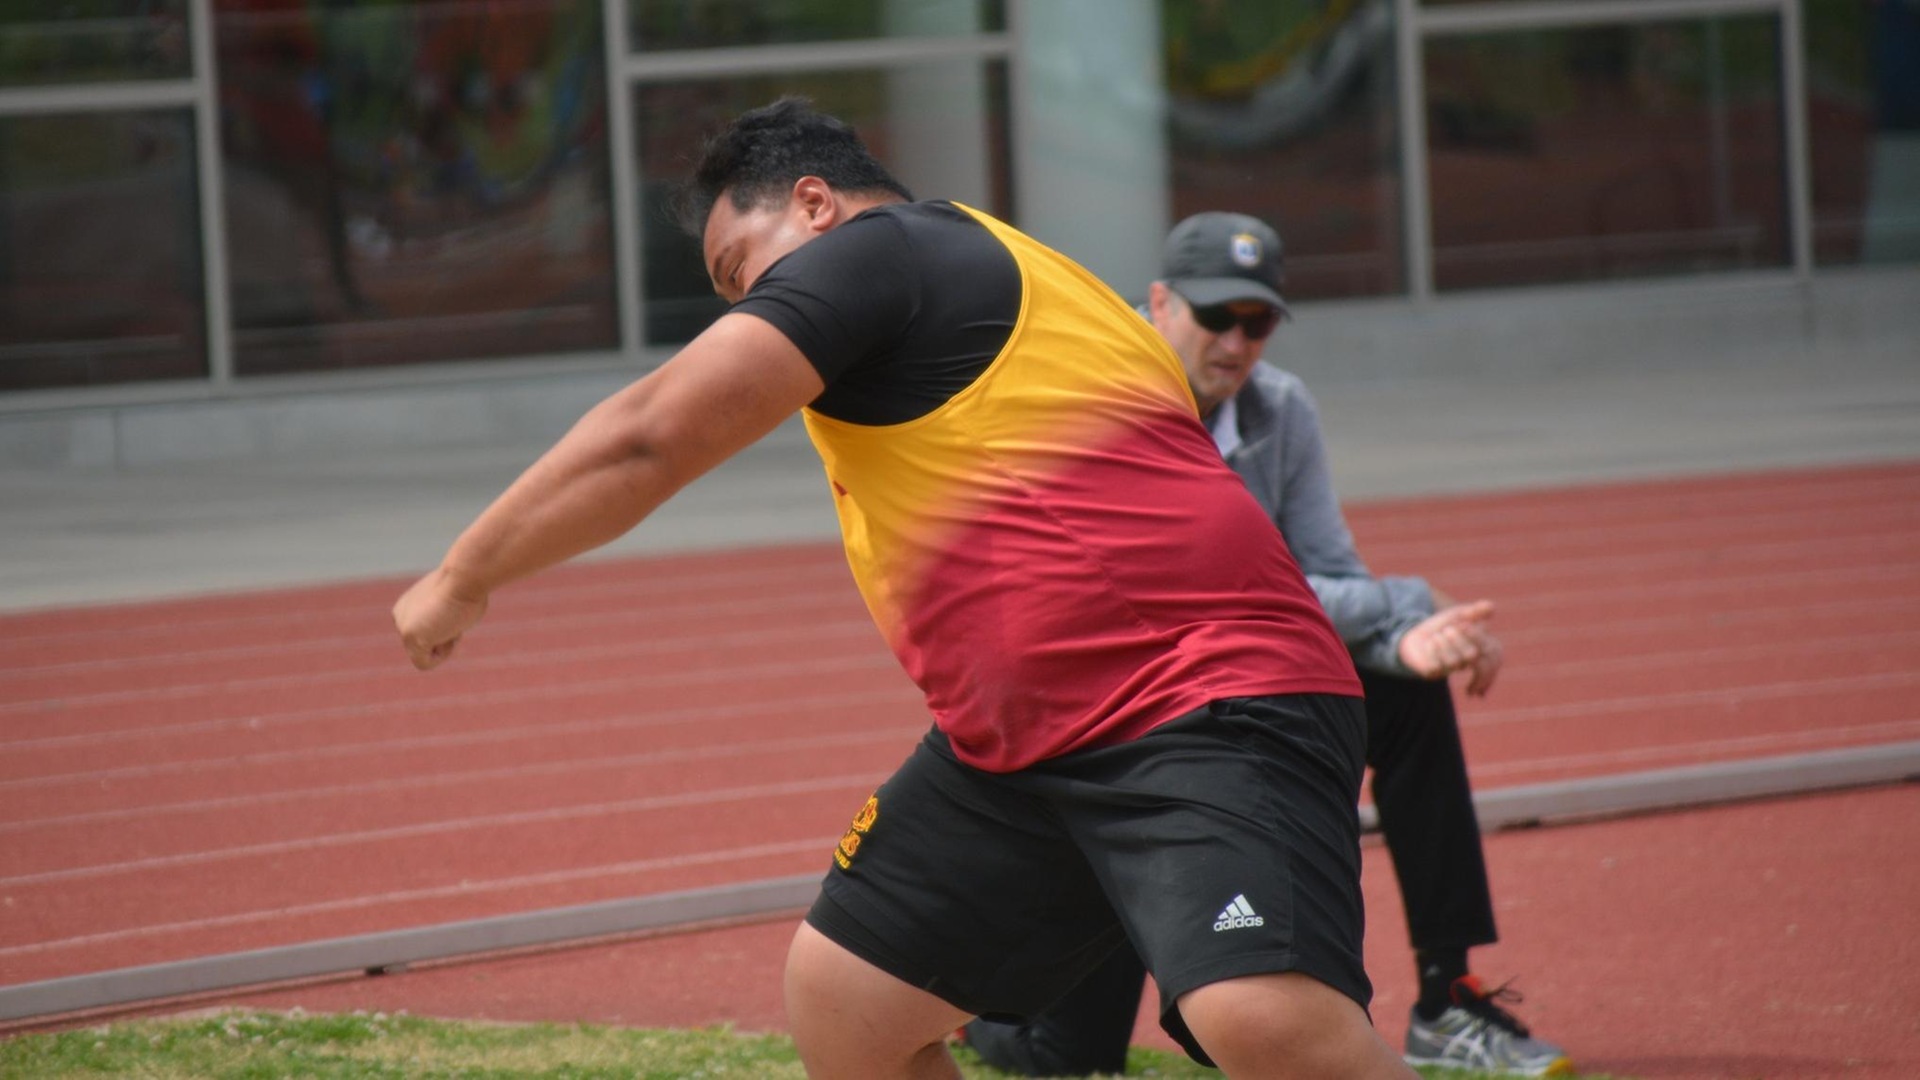 Tyson-Jay Saena earned first place in the hammer throw